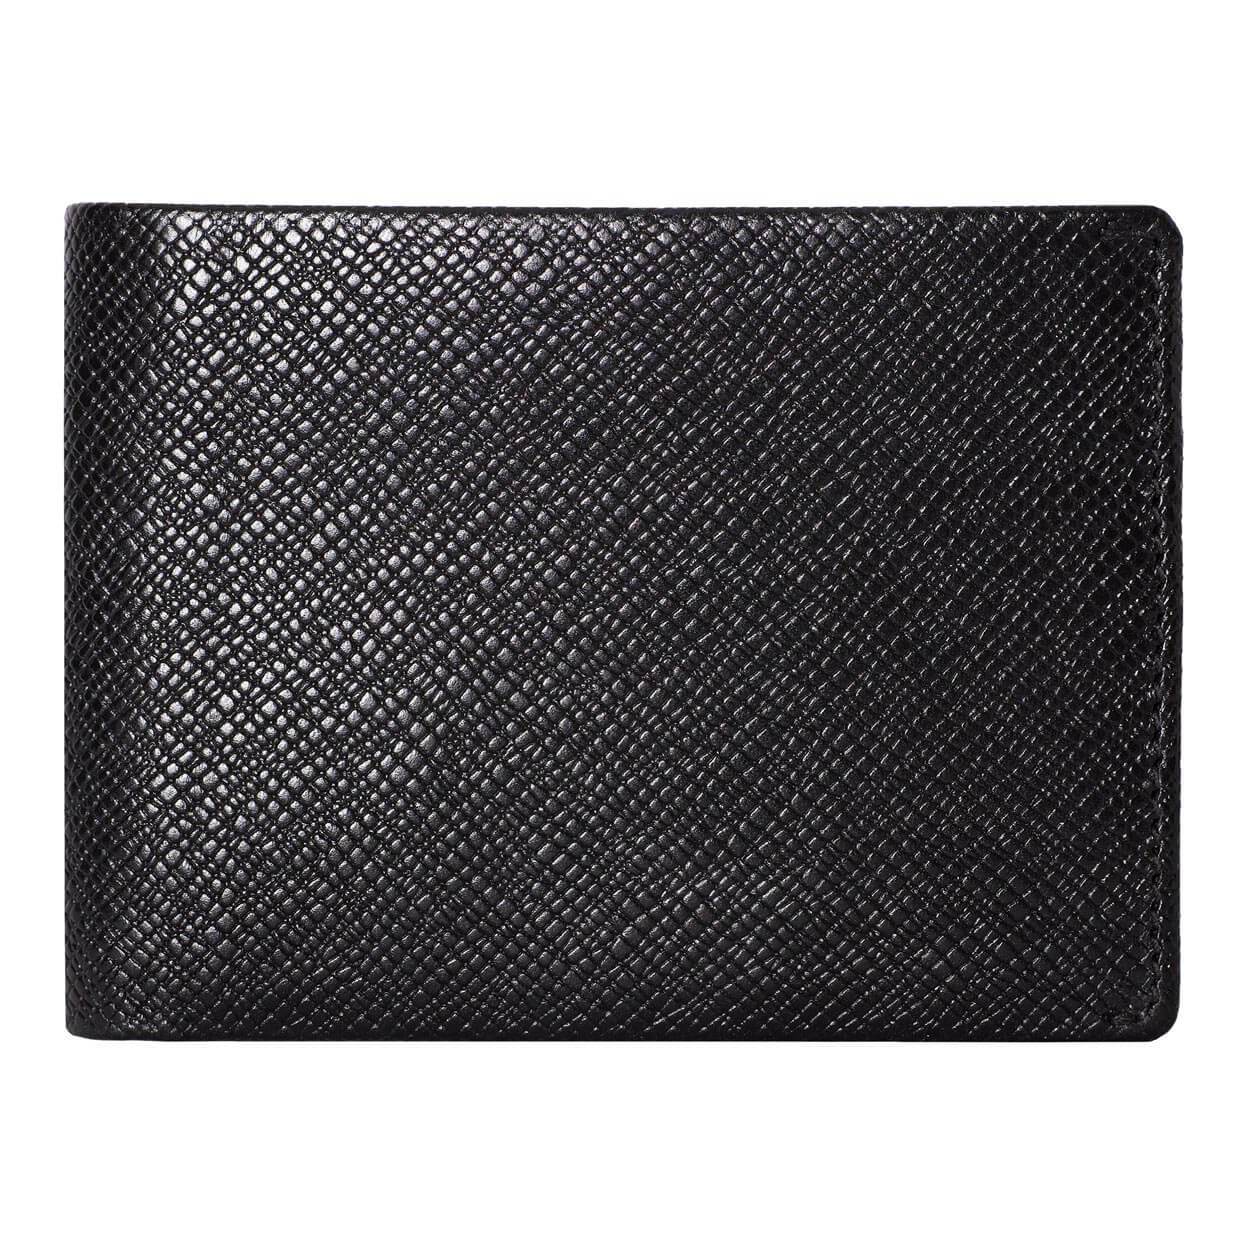 A slim bifold wallet made from genuine Saffiano leather with RFID blocking technology and two ID windows - Front View